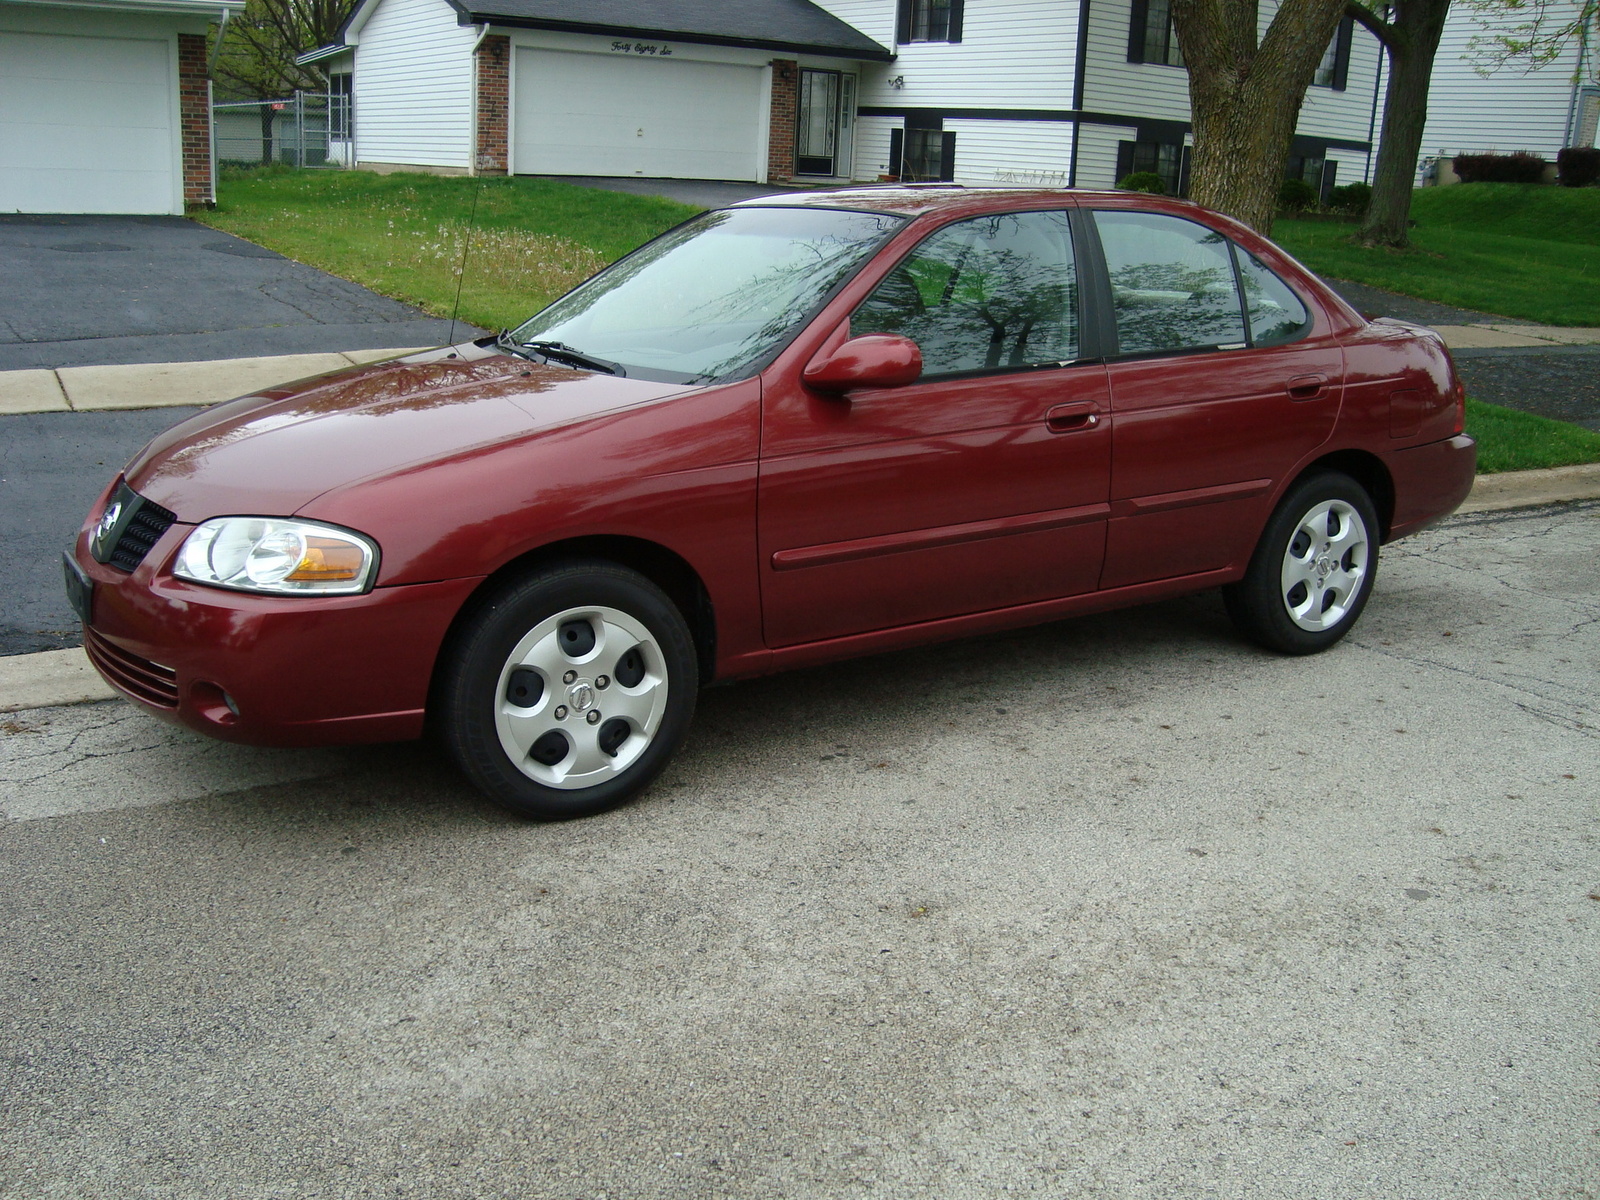 2004 Nissan sentra used car review #2